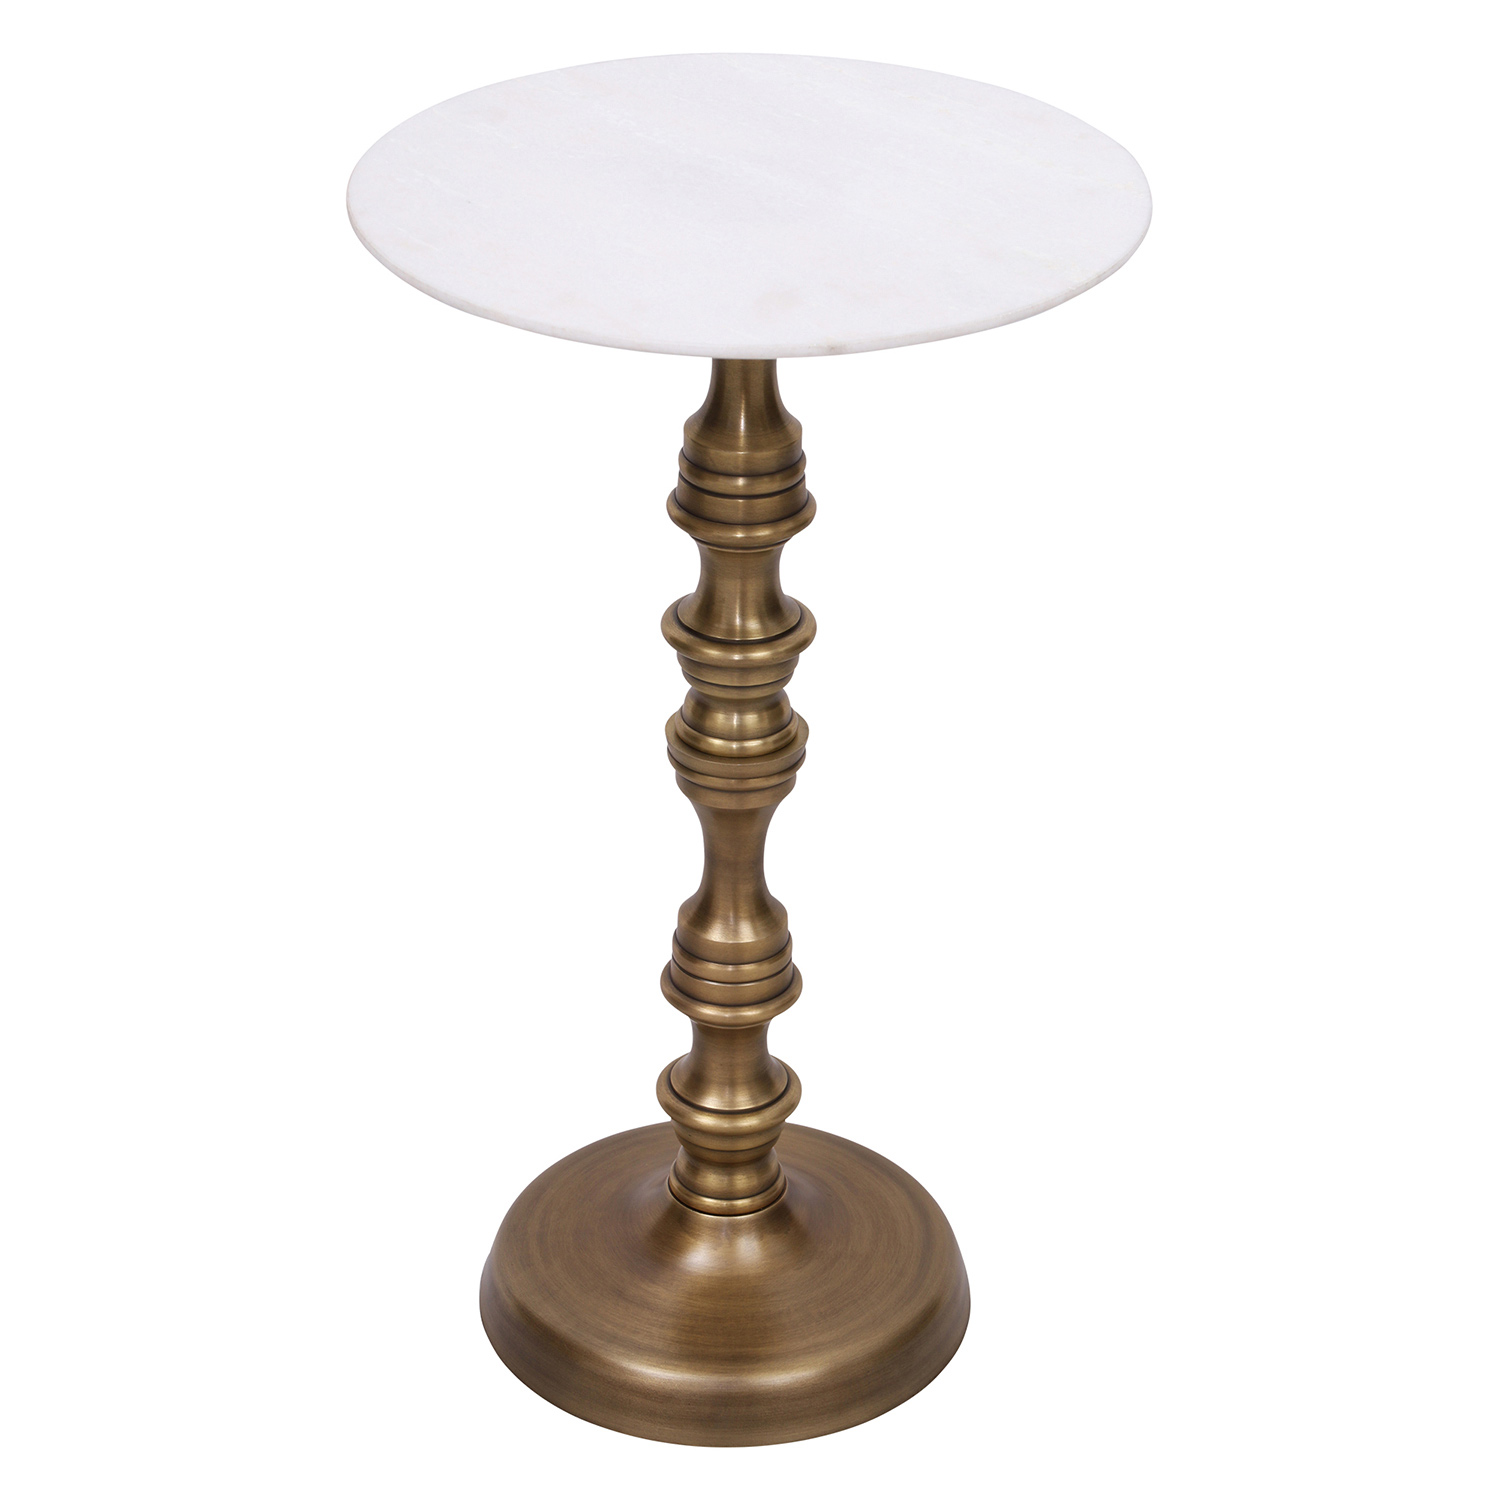 Ren-Wil Shelby Accent table - Brass Antique